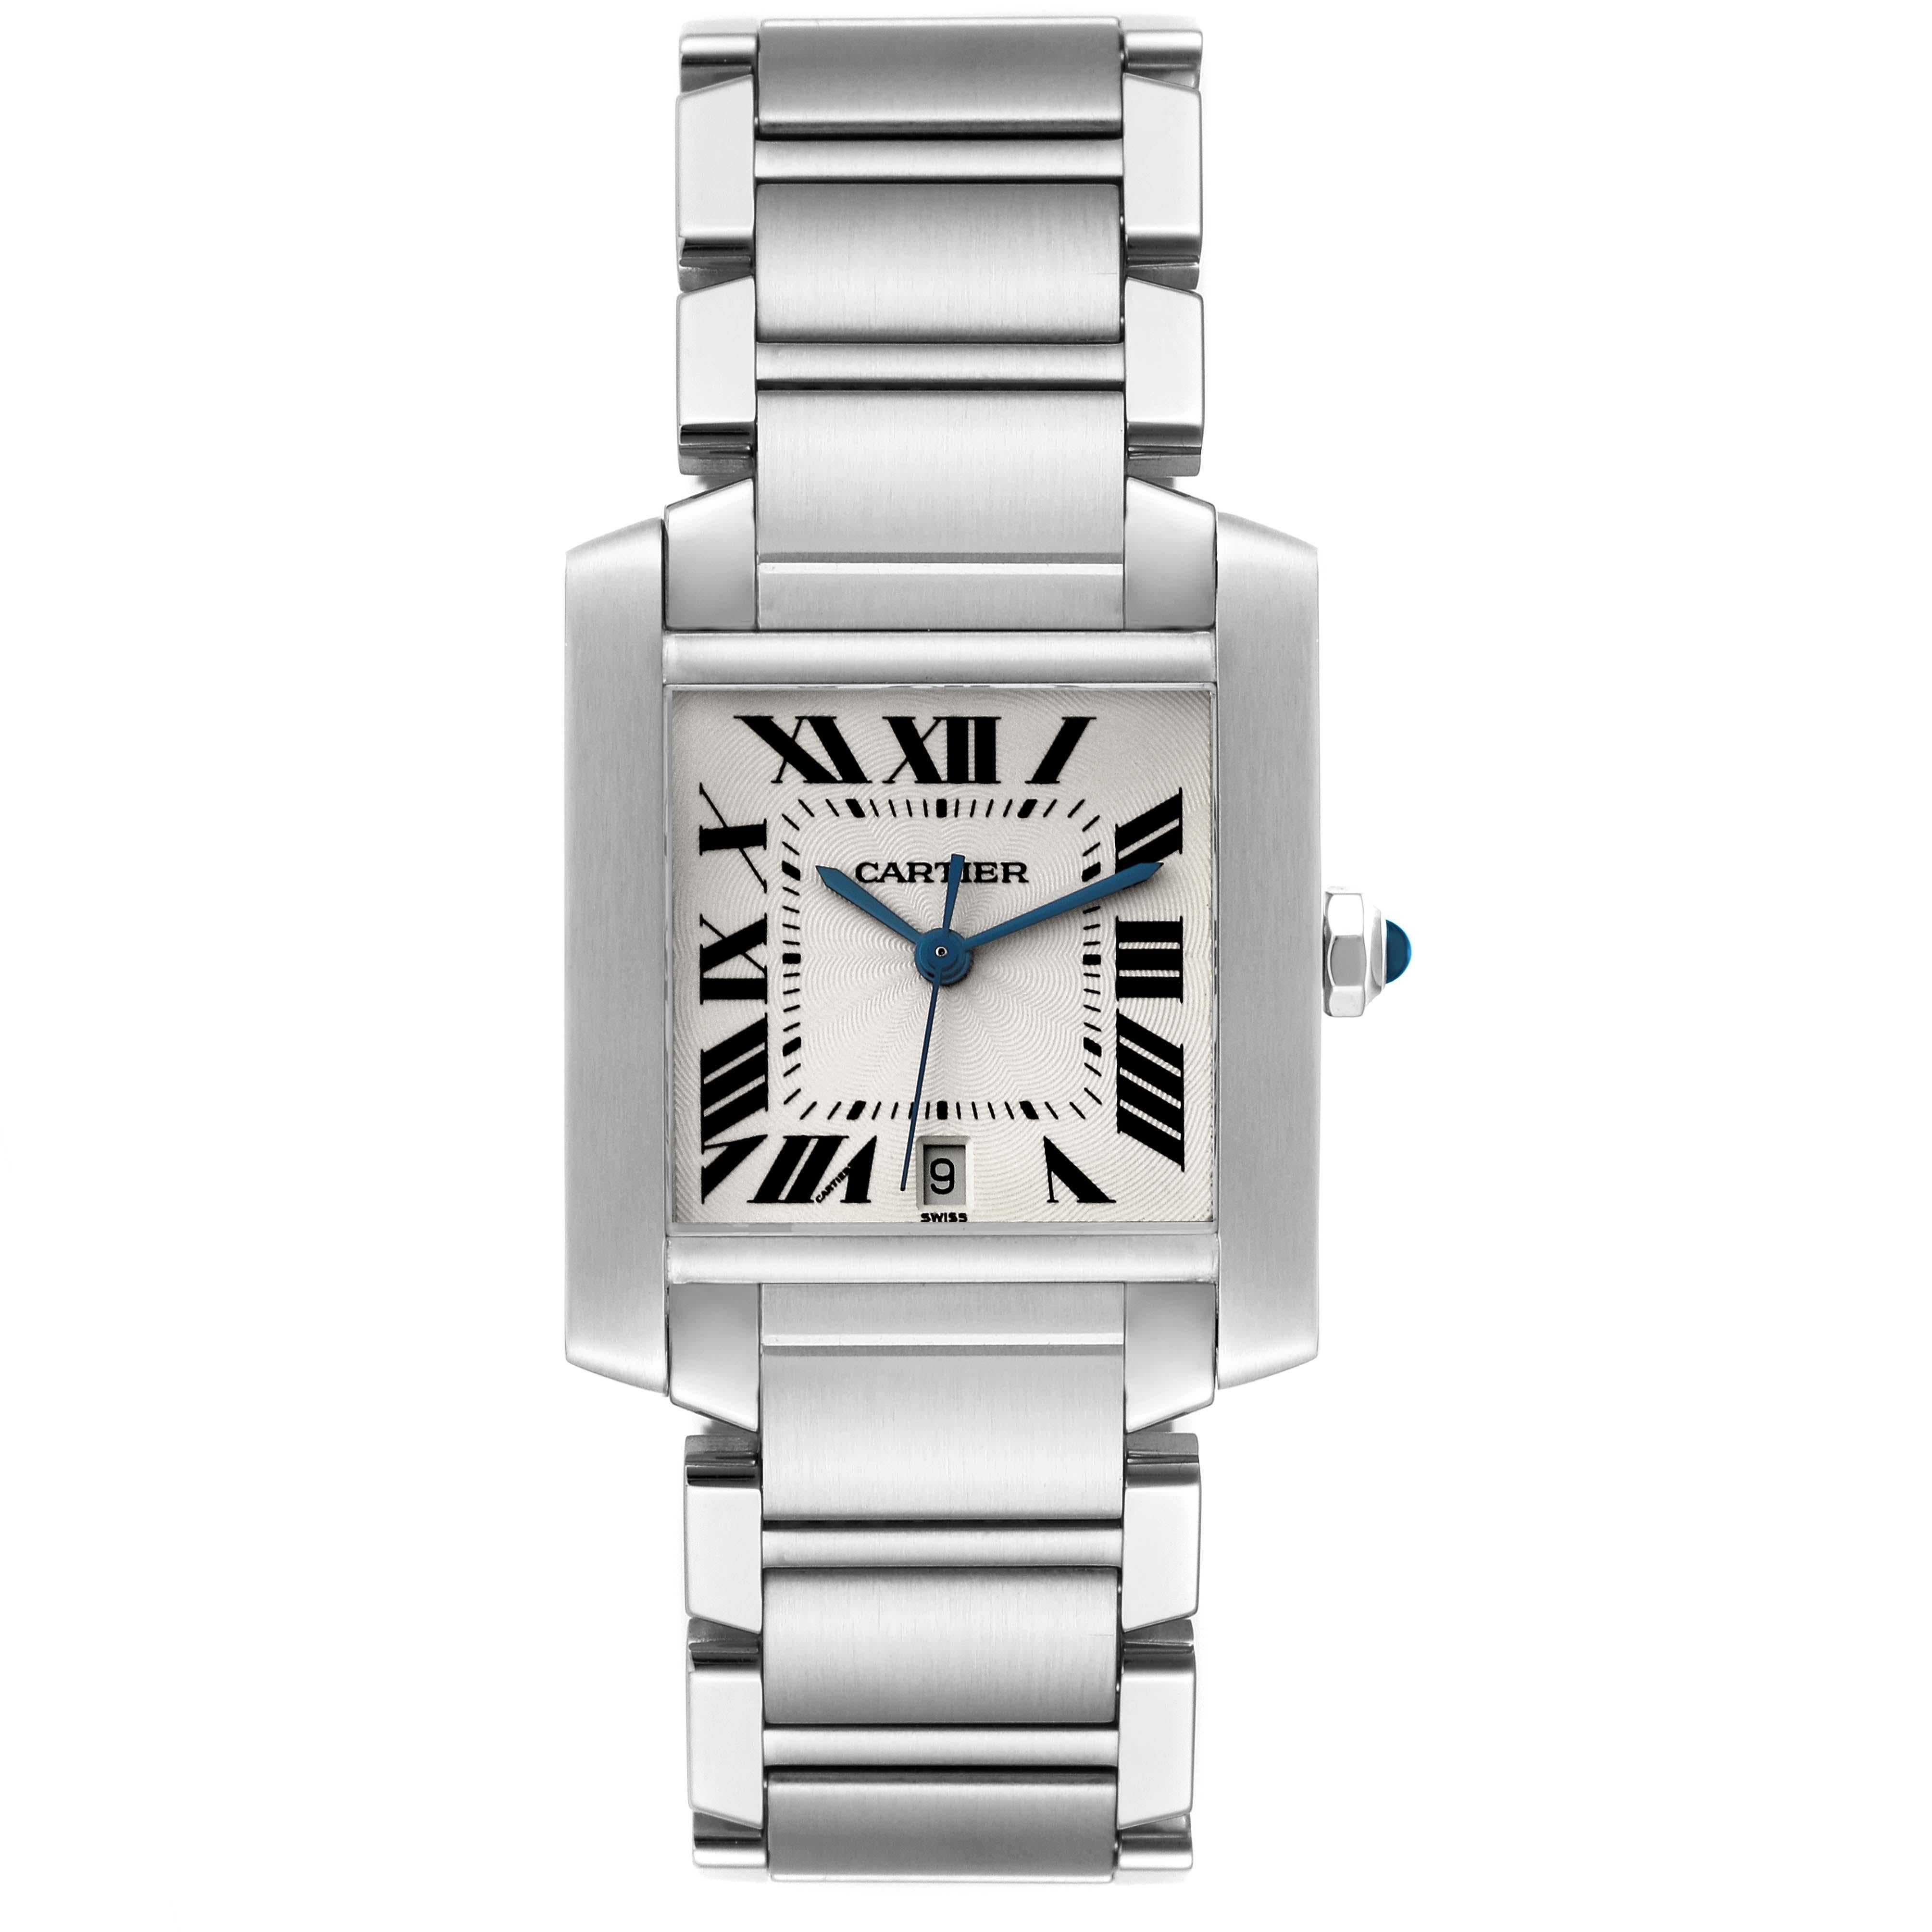 Cartier Tank Francaise Large Automatic Steel Mens Watch W51002Q3 In Excellent Condition For Sale In Atlanta, GA